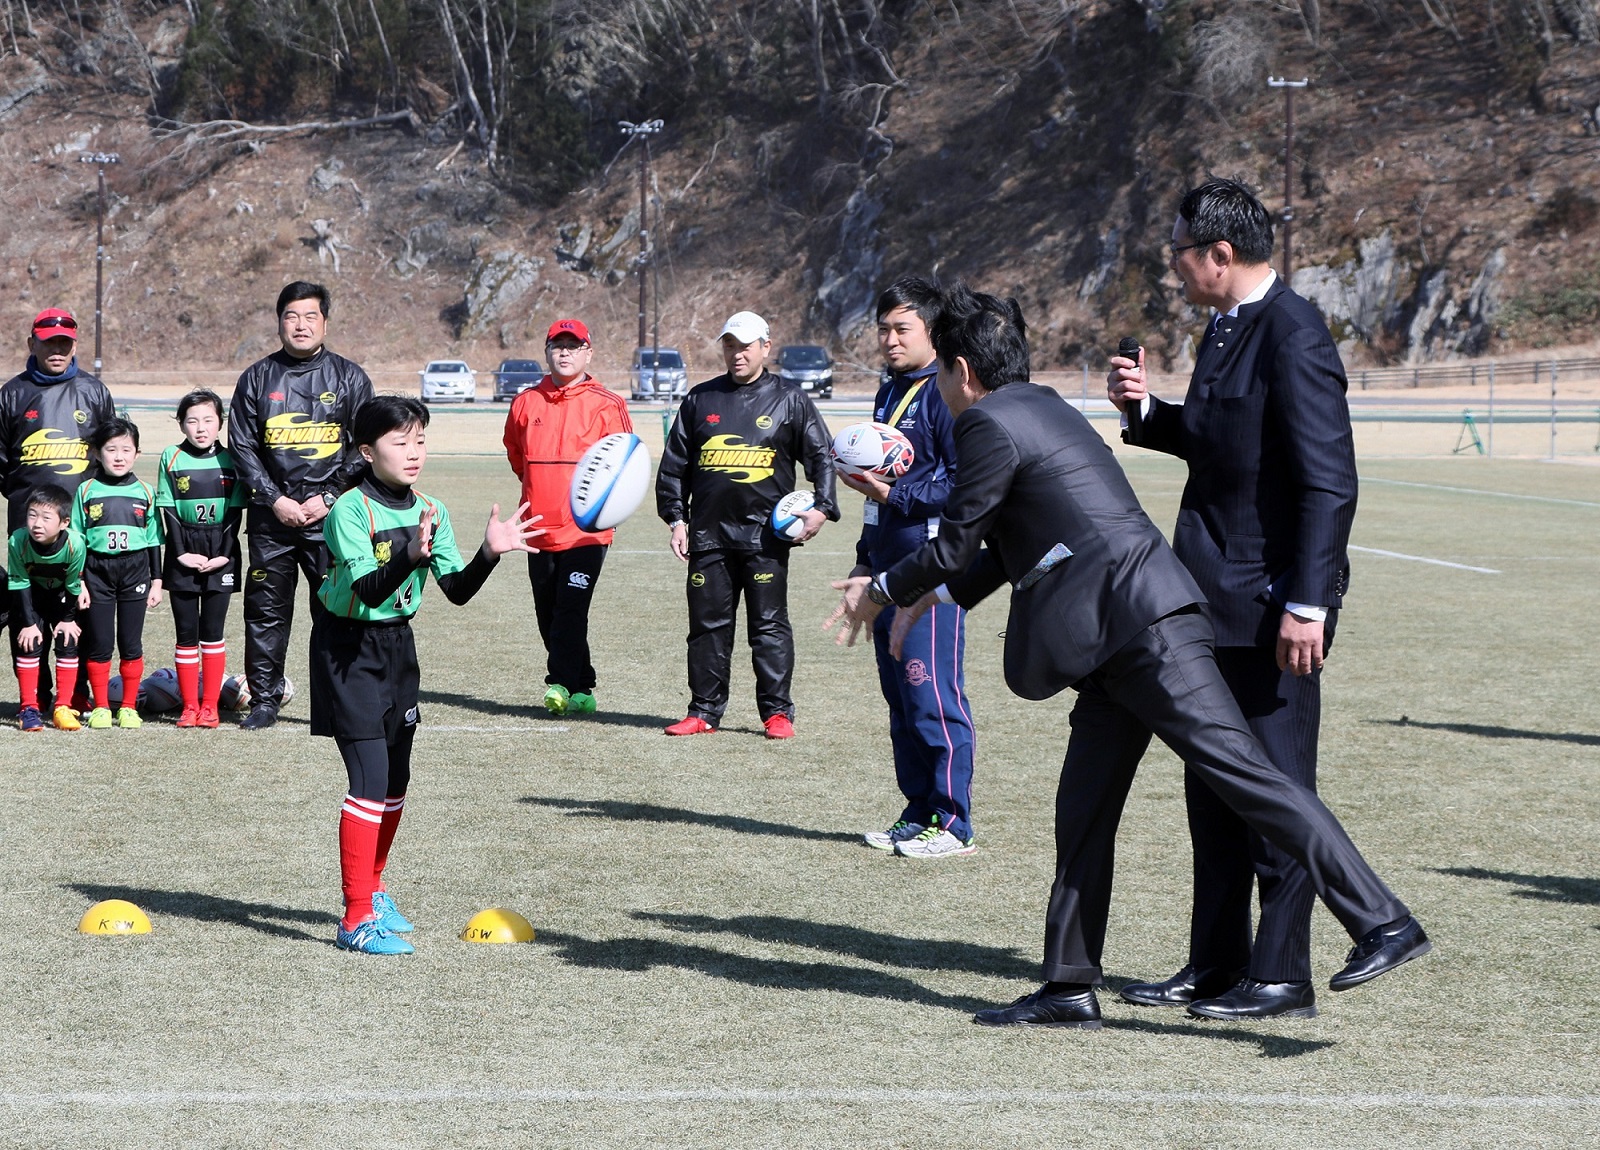 Photograph of the Prime Minister observing children practicing rugby